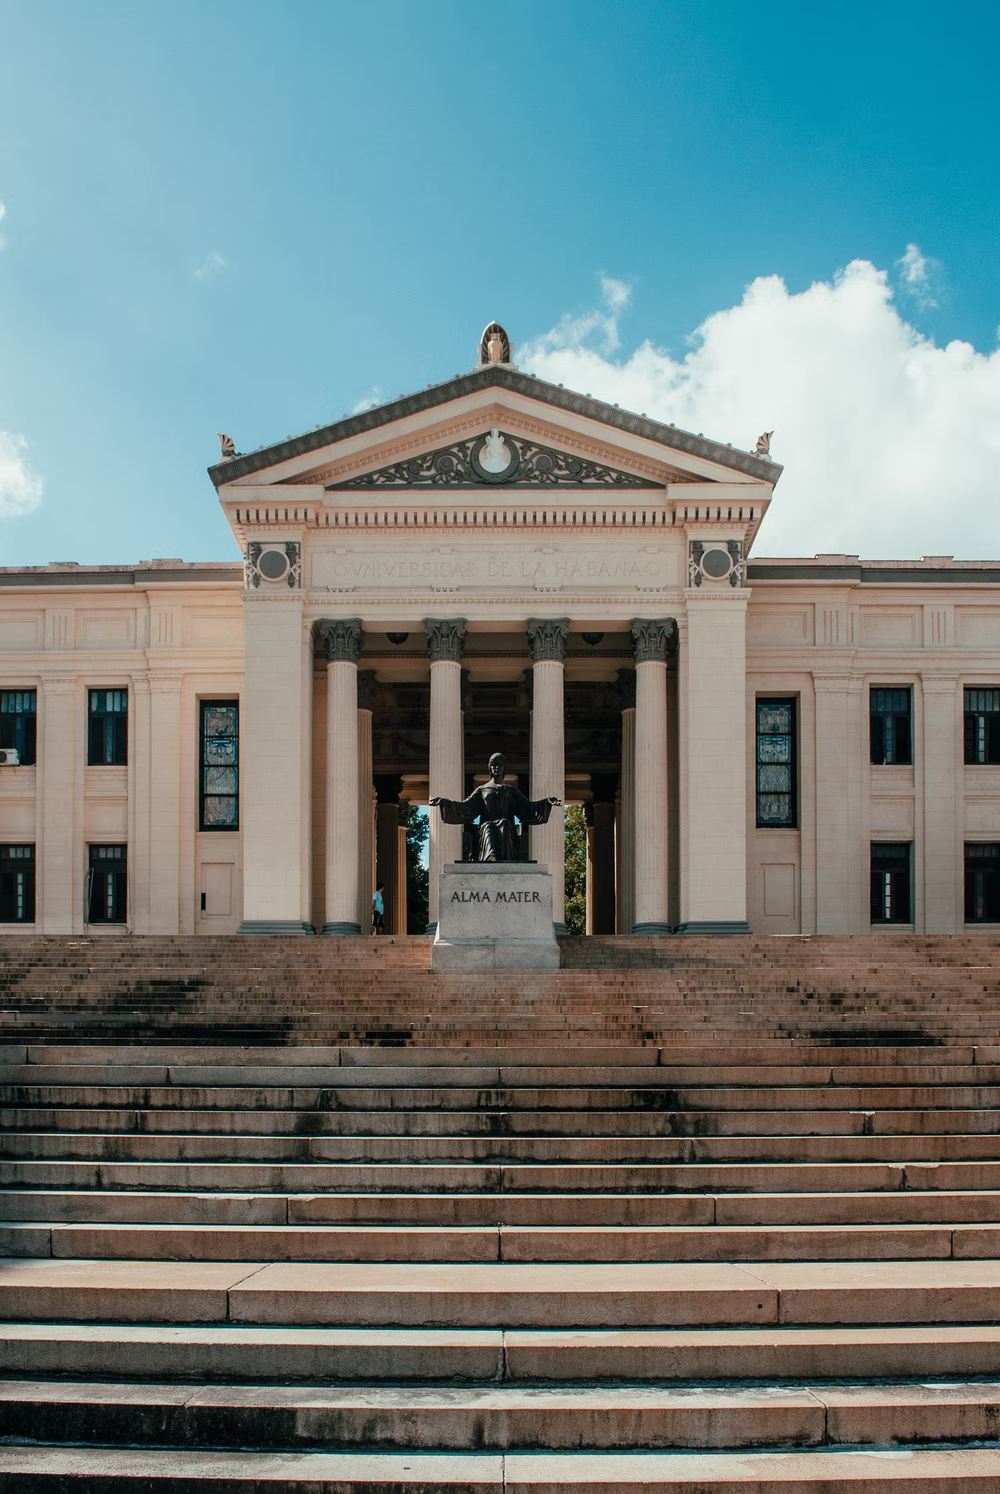 Image description: A photo of steep steps at the University of Havana, Cuba. At the top of the steps is a replica of the Alma Mater, also known as the "nourishing mother." The figure, clad in a bulky gown and crowned with a laurel wreath, sits on a throne with both arms mid-raised. A large book, representing knowledge, sits open on her lap. The original sculpture of the Alma Mater is located at the top of the steps to Low Memorial Library on Columbia University campus in New York City. Photo by Remy Gieling.